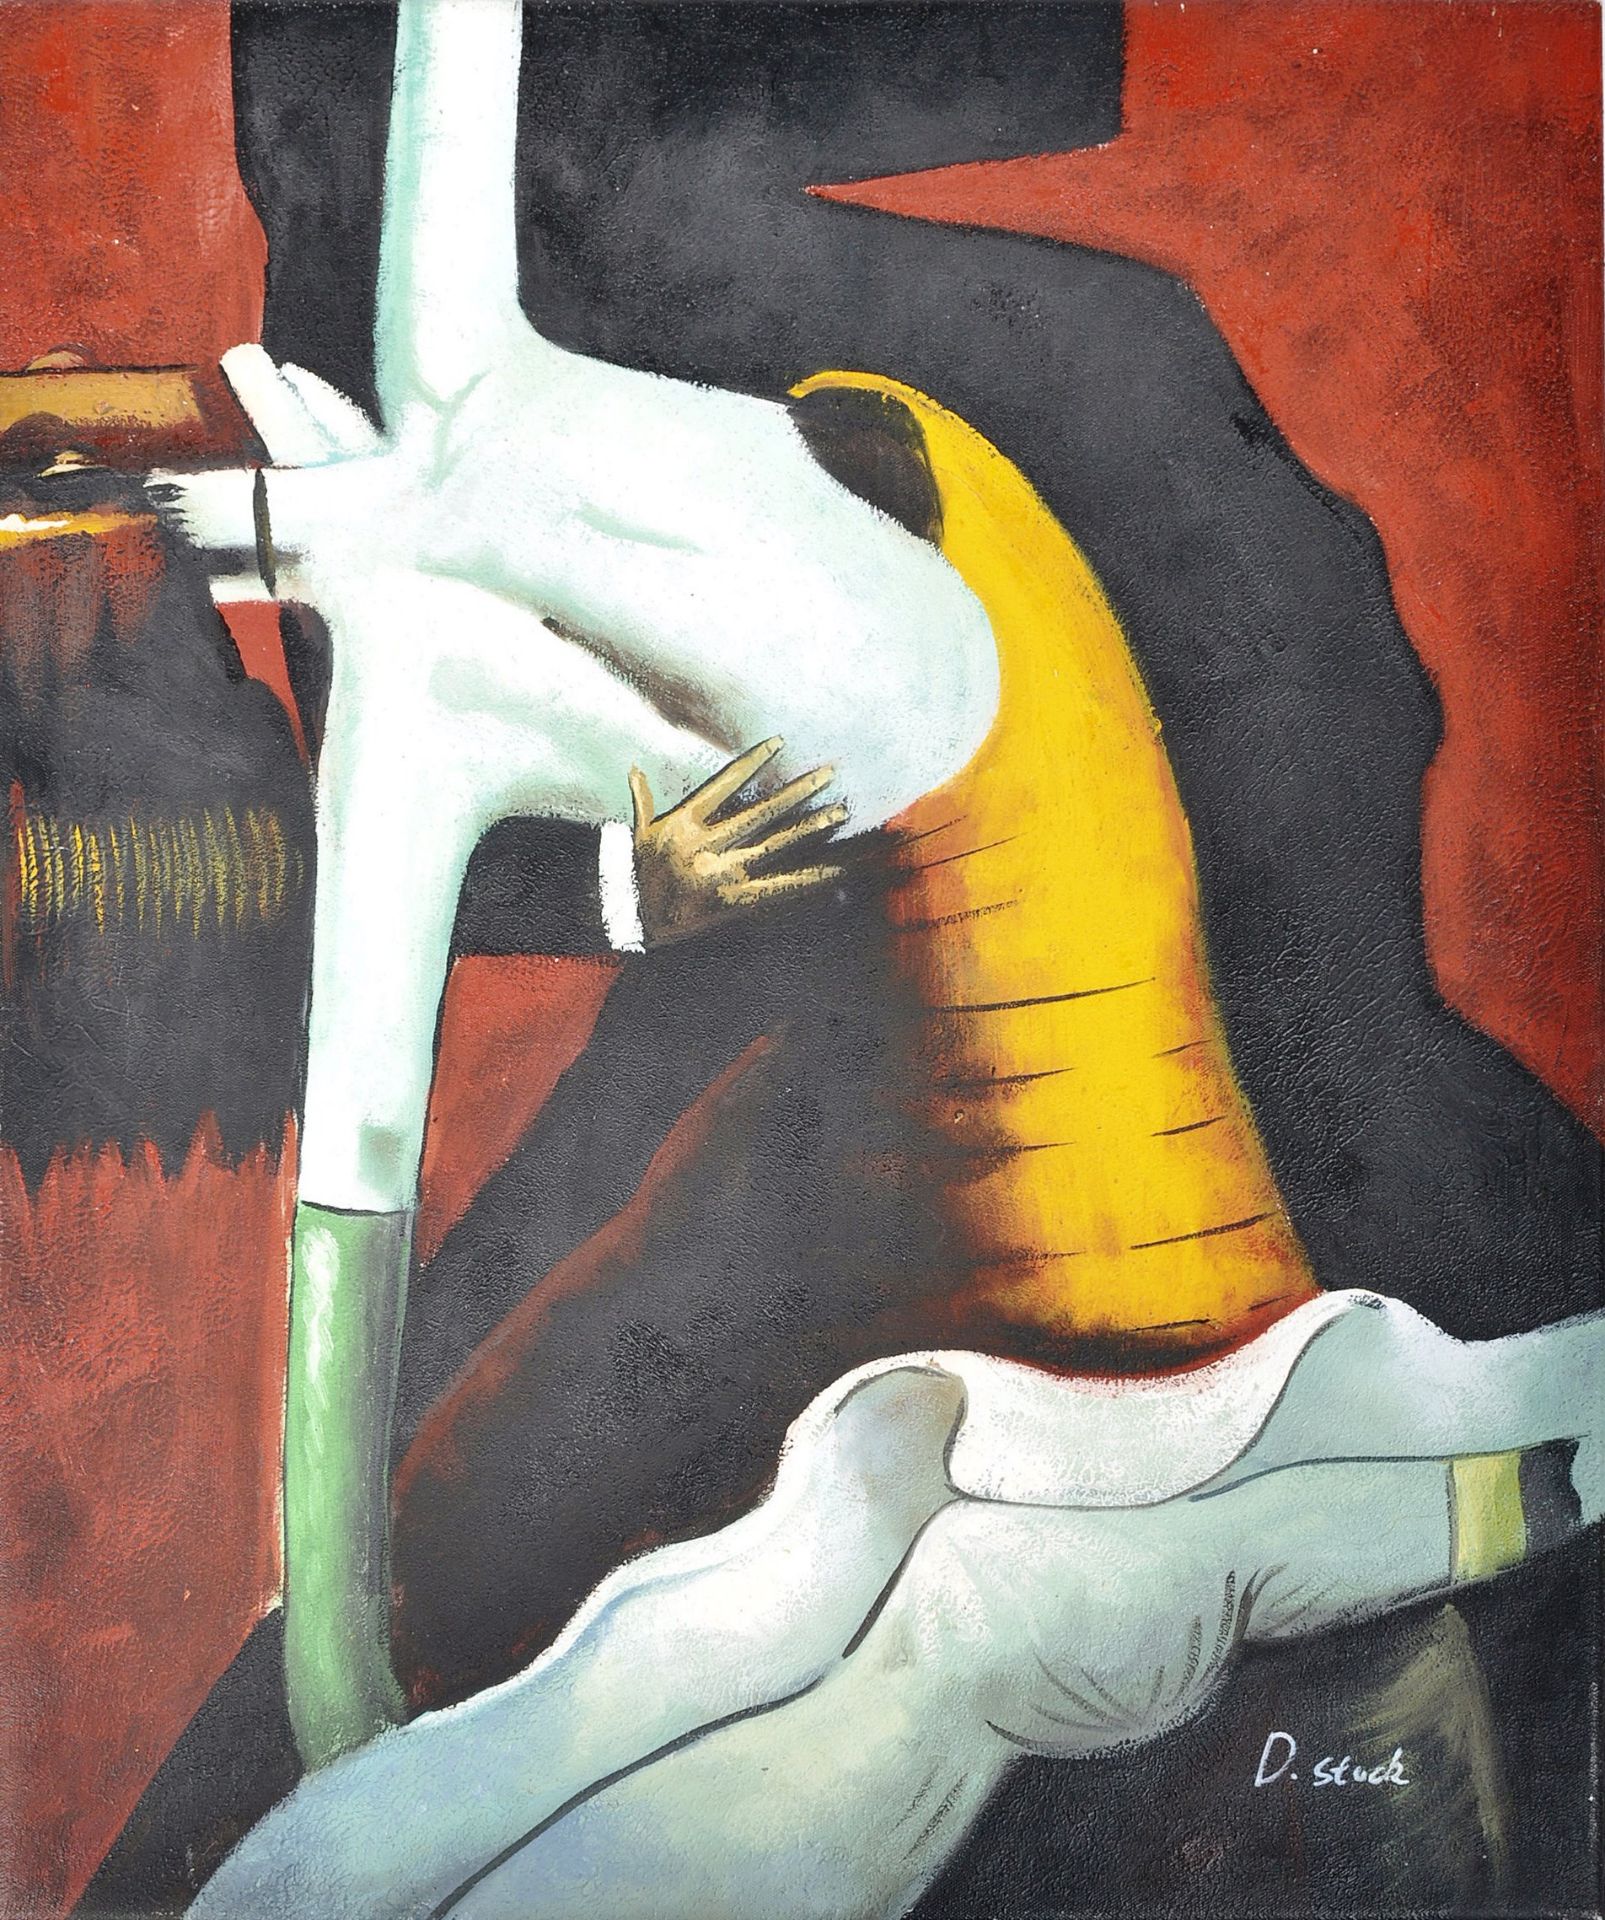 D STACK - 20TH CENTURY SURREAL OIL ON CANVAS PAINTING